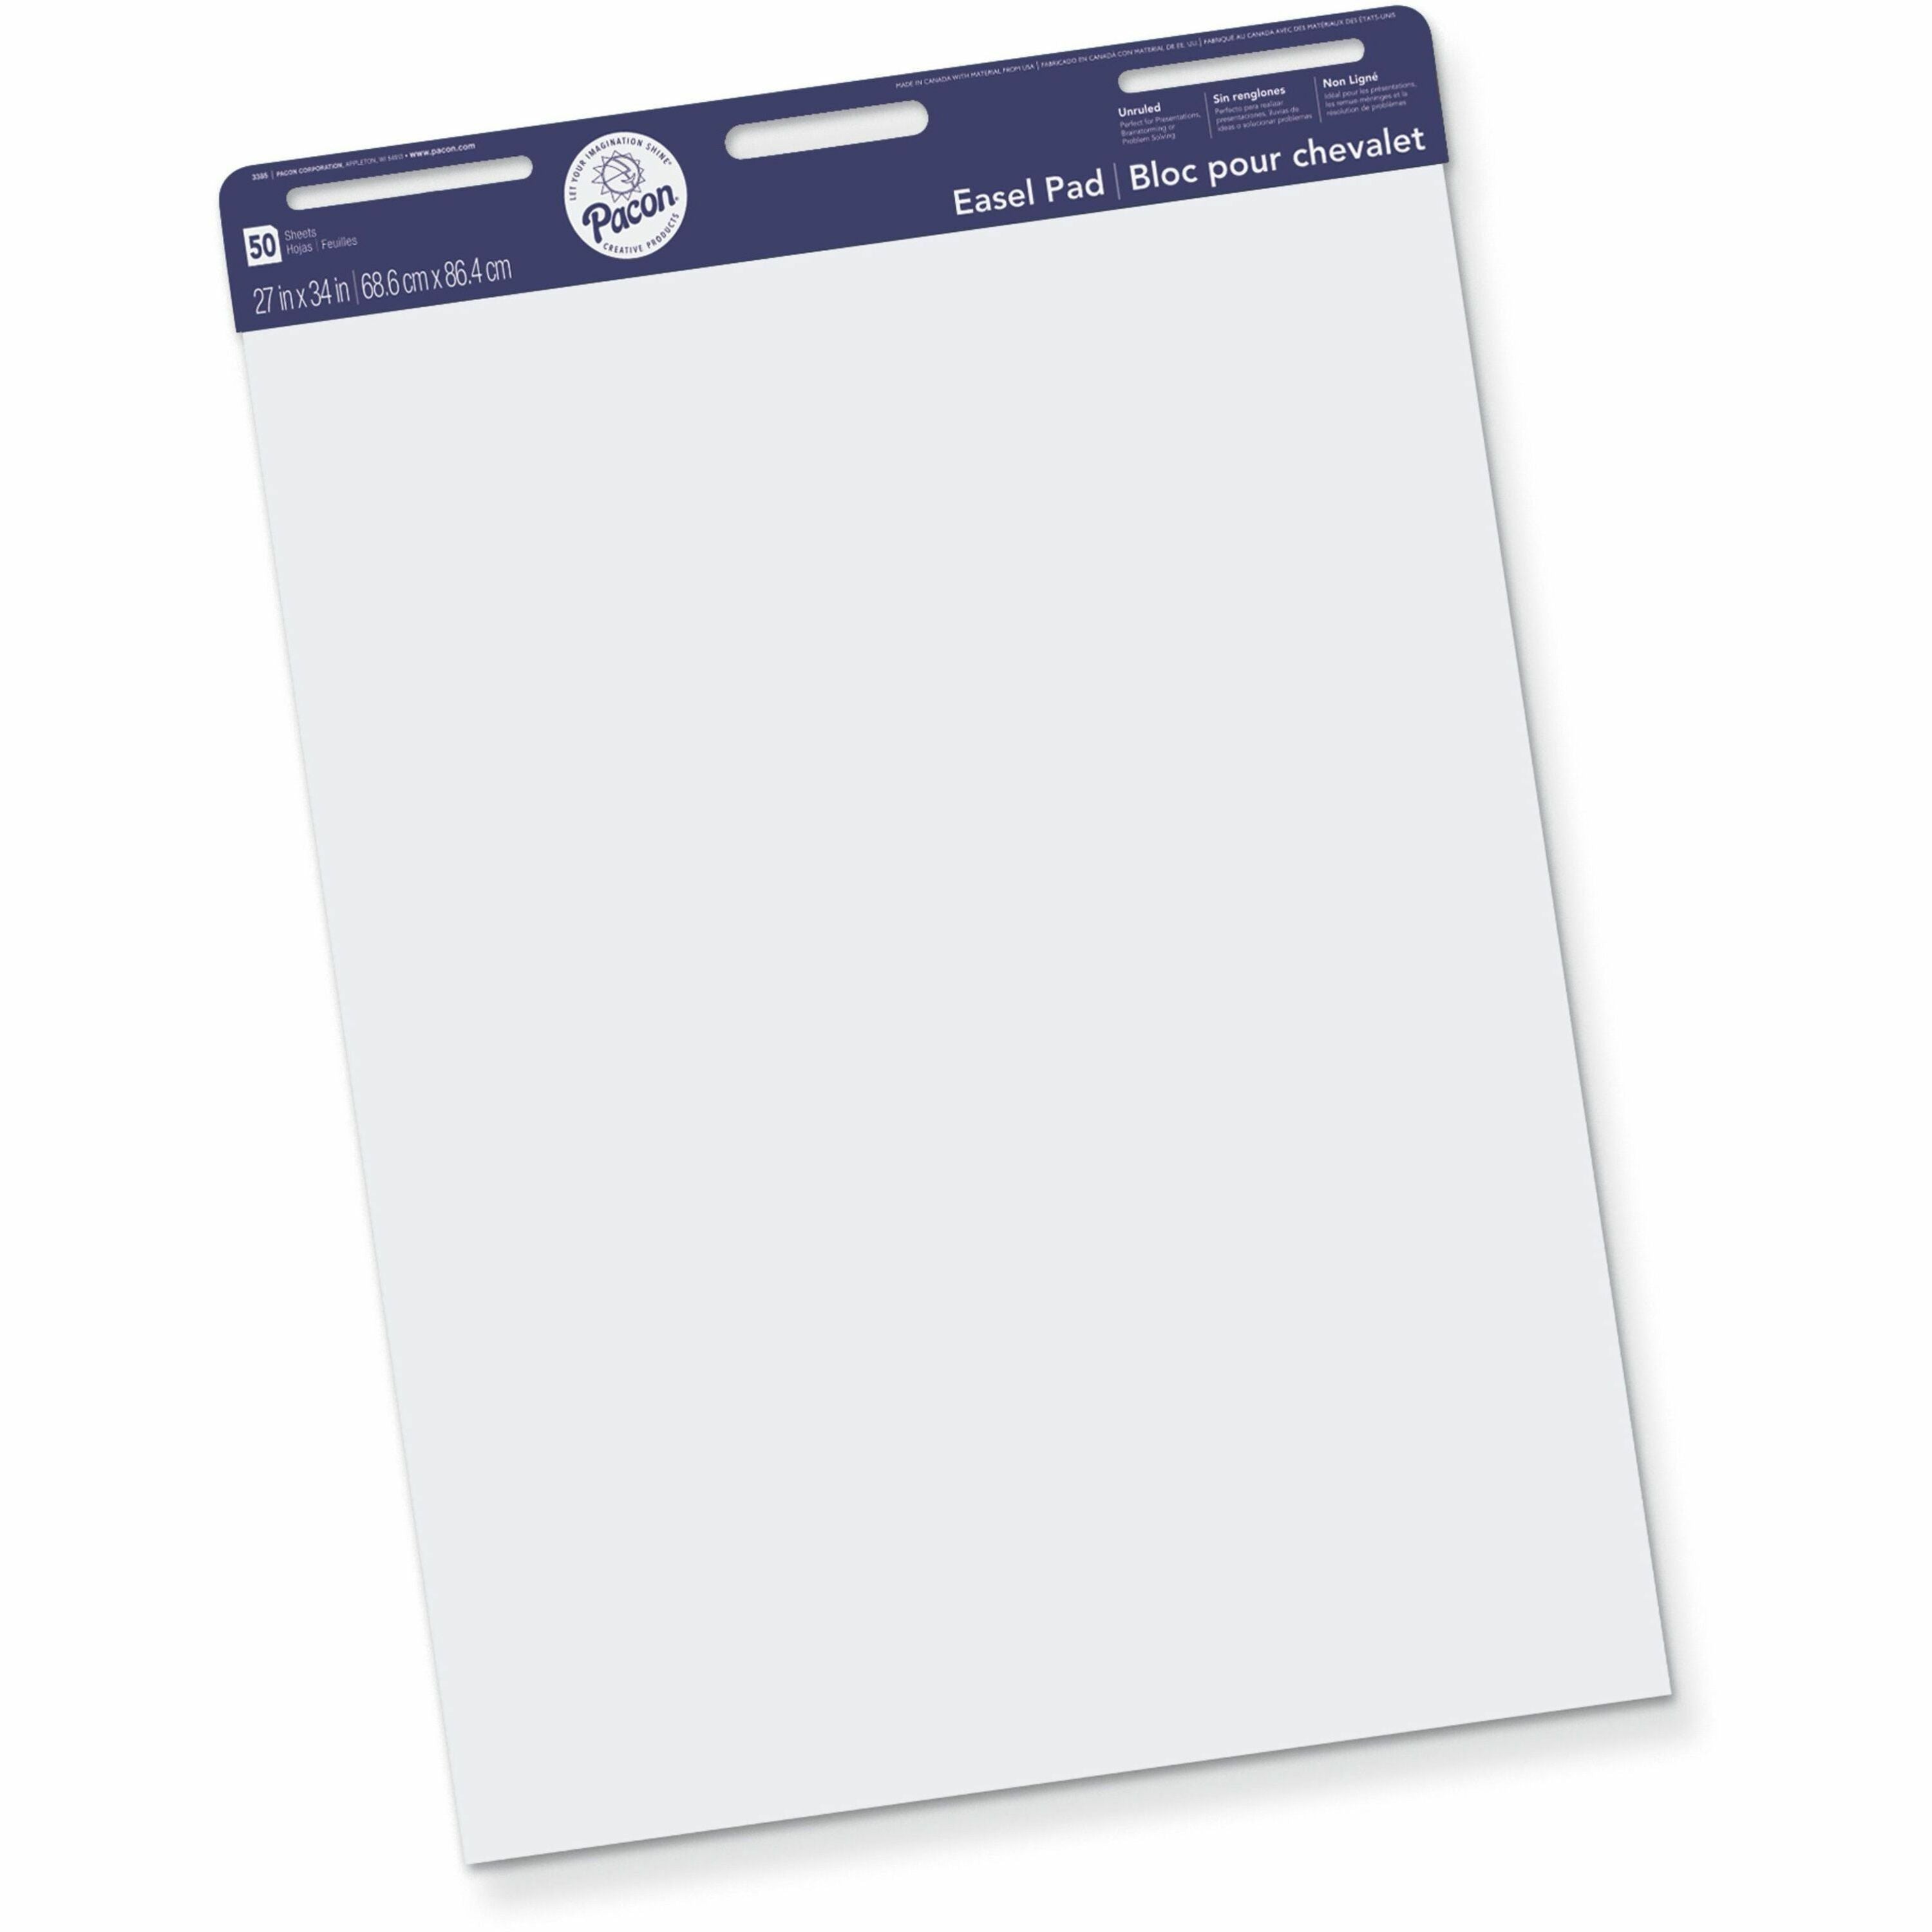 Pacon Unruled Easel Pads - 50 Sheets - Plain - Stapled/Glued - Unruled - 27" x 34" - White Paper - Chipboard Cover - Perforated, Bond Paper - 50 / Pad - 